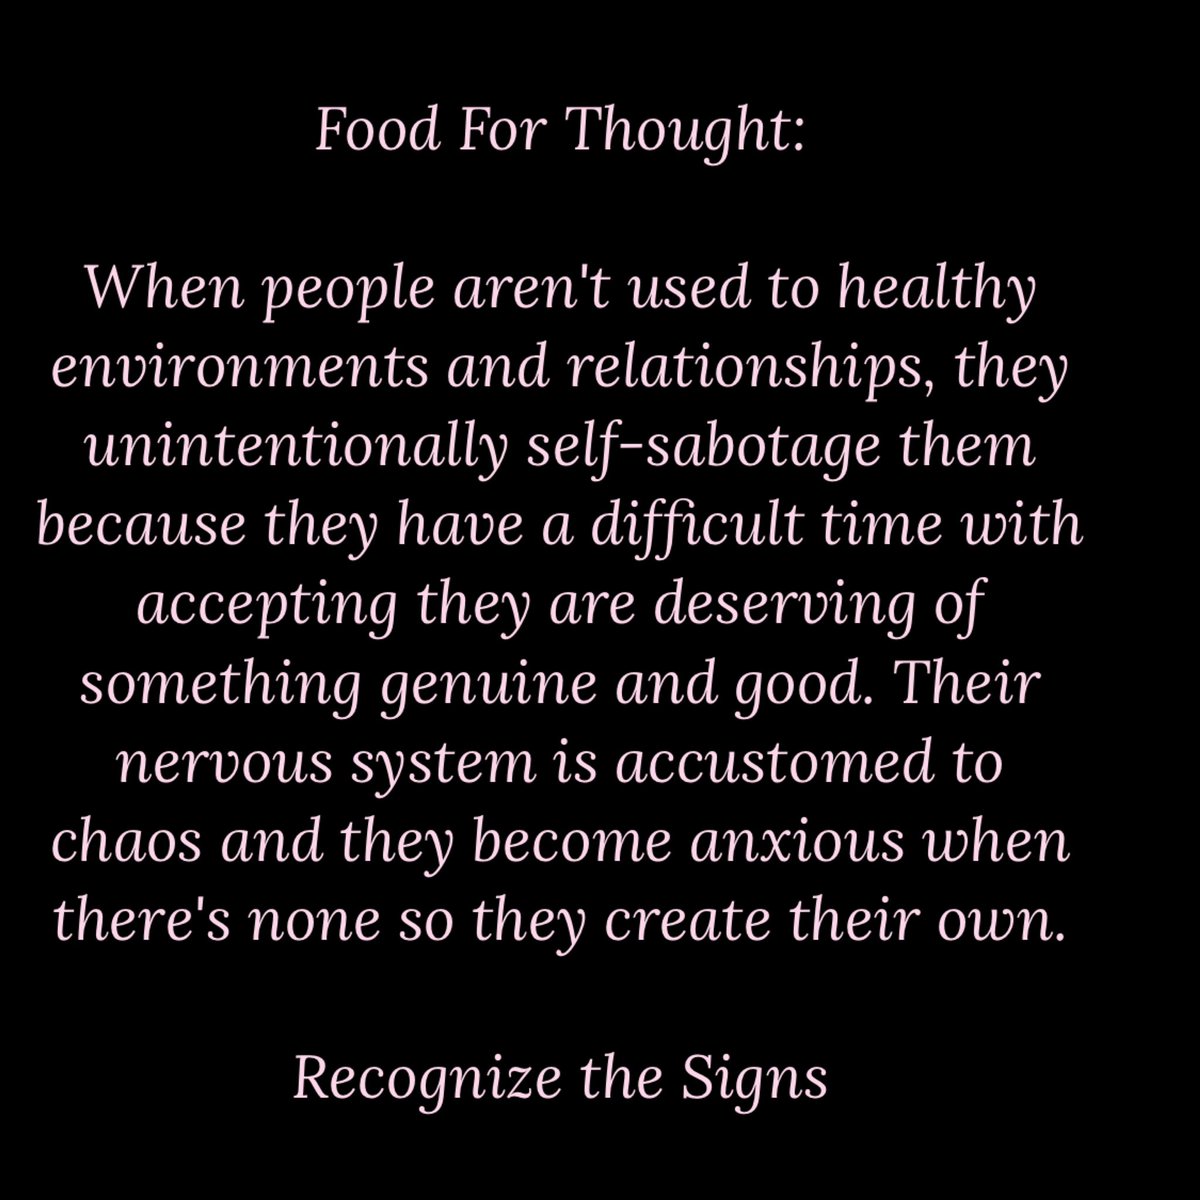 When people aren't used to healthy environments and relationships, they unintentionally self-sabotage them because they have a difficult time with accepting they are deserving of something genuine and good. Their nervous system is accustomed to chaos and they become anxious when